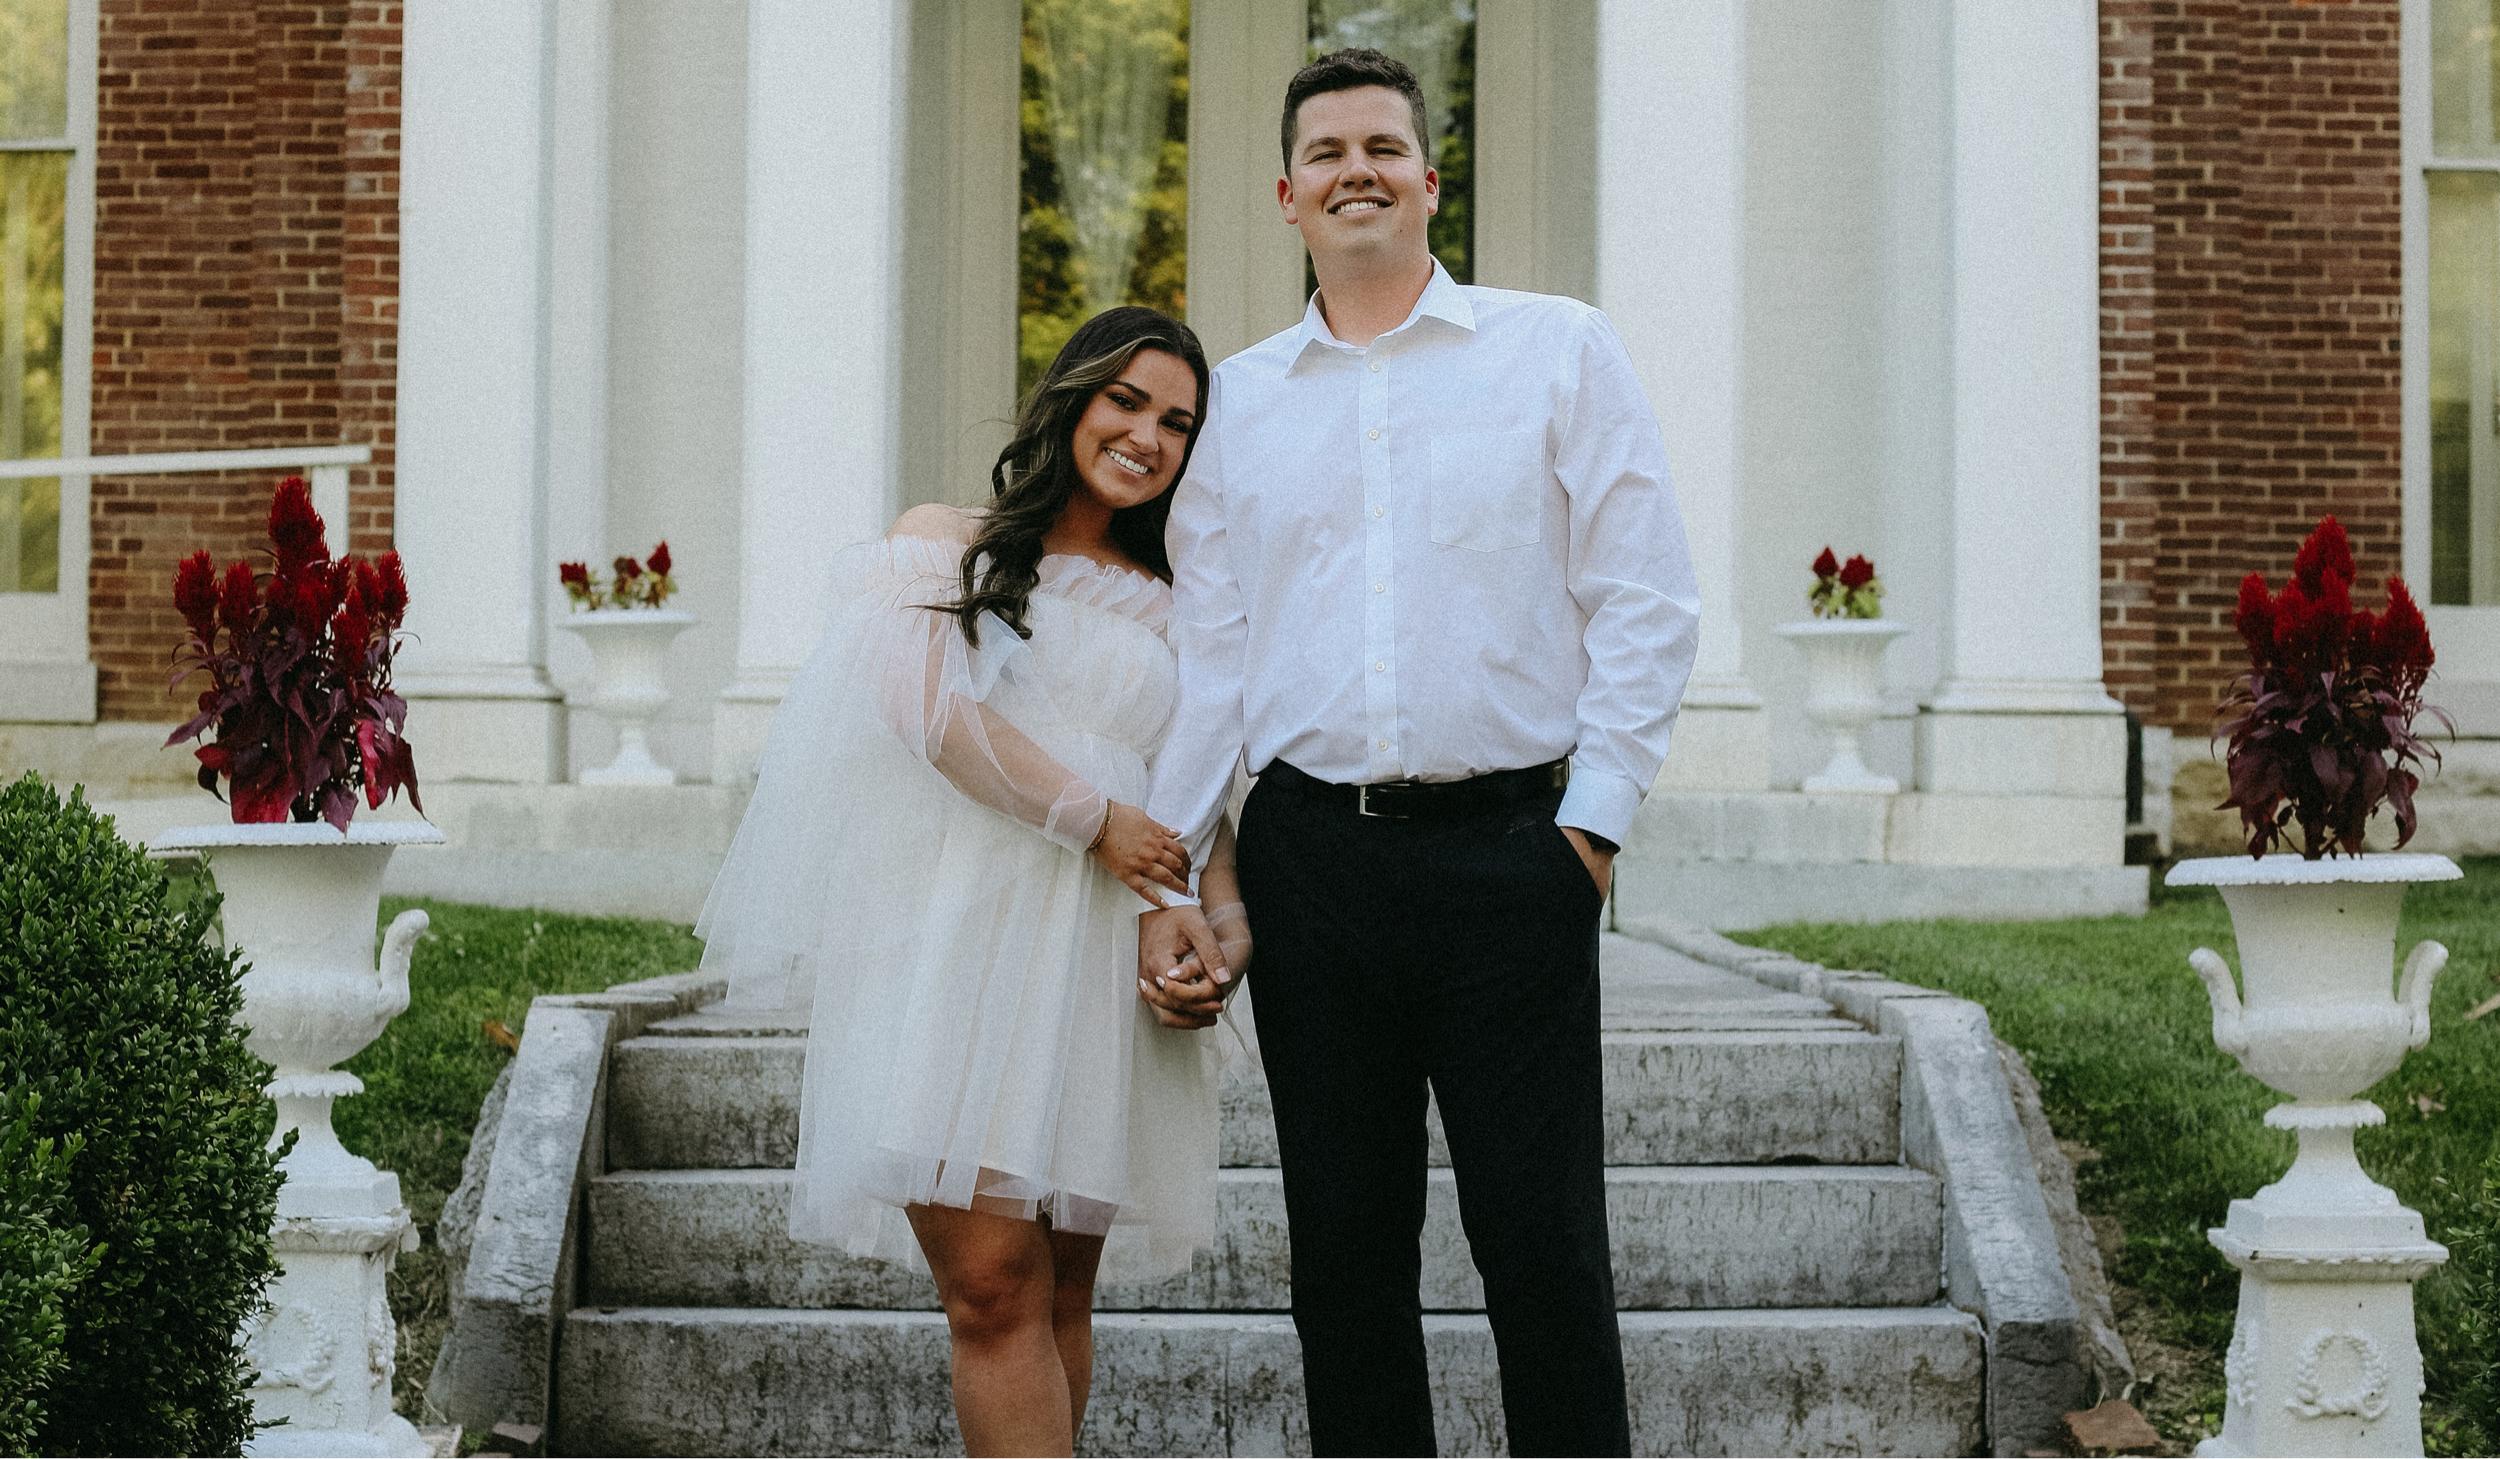 The Wedding Website of Brittany Moody and Alex Georgel